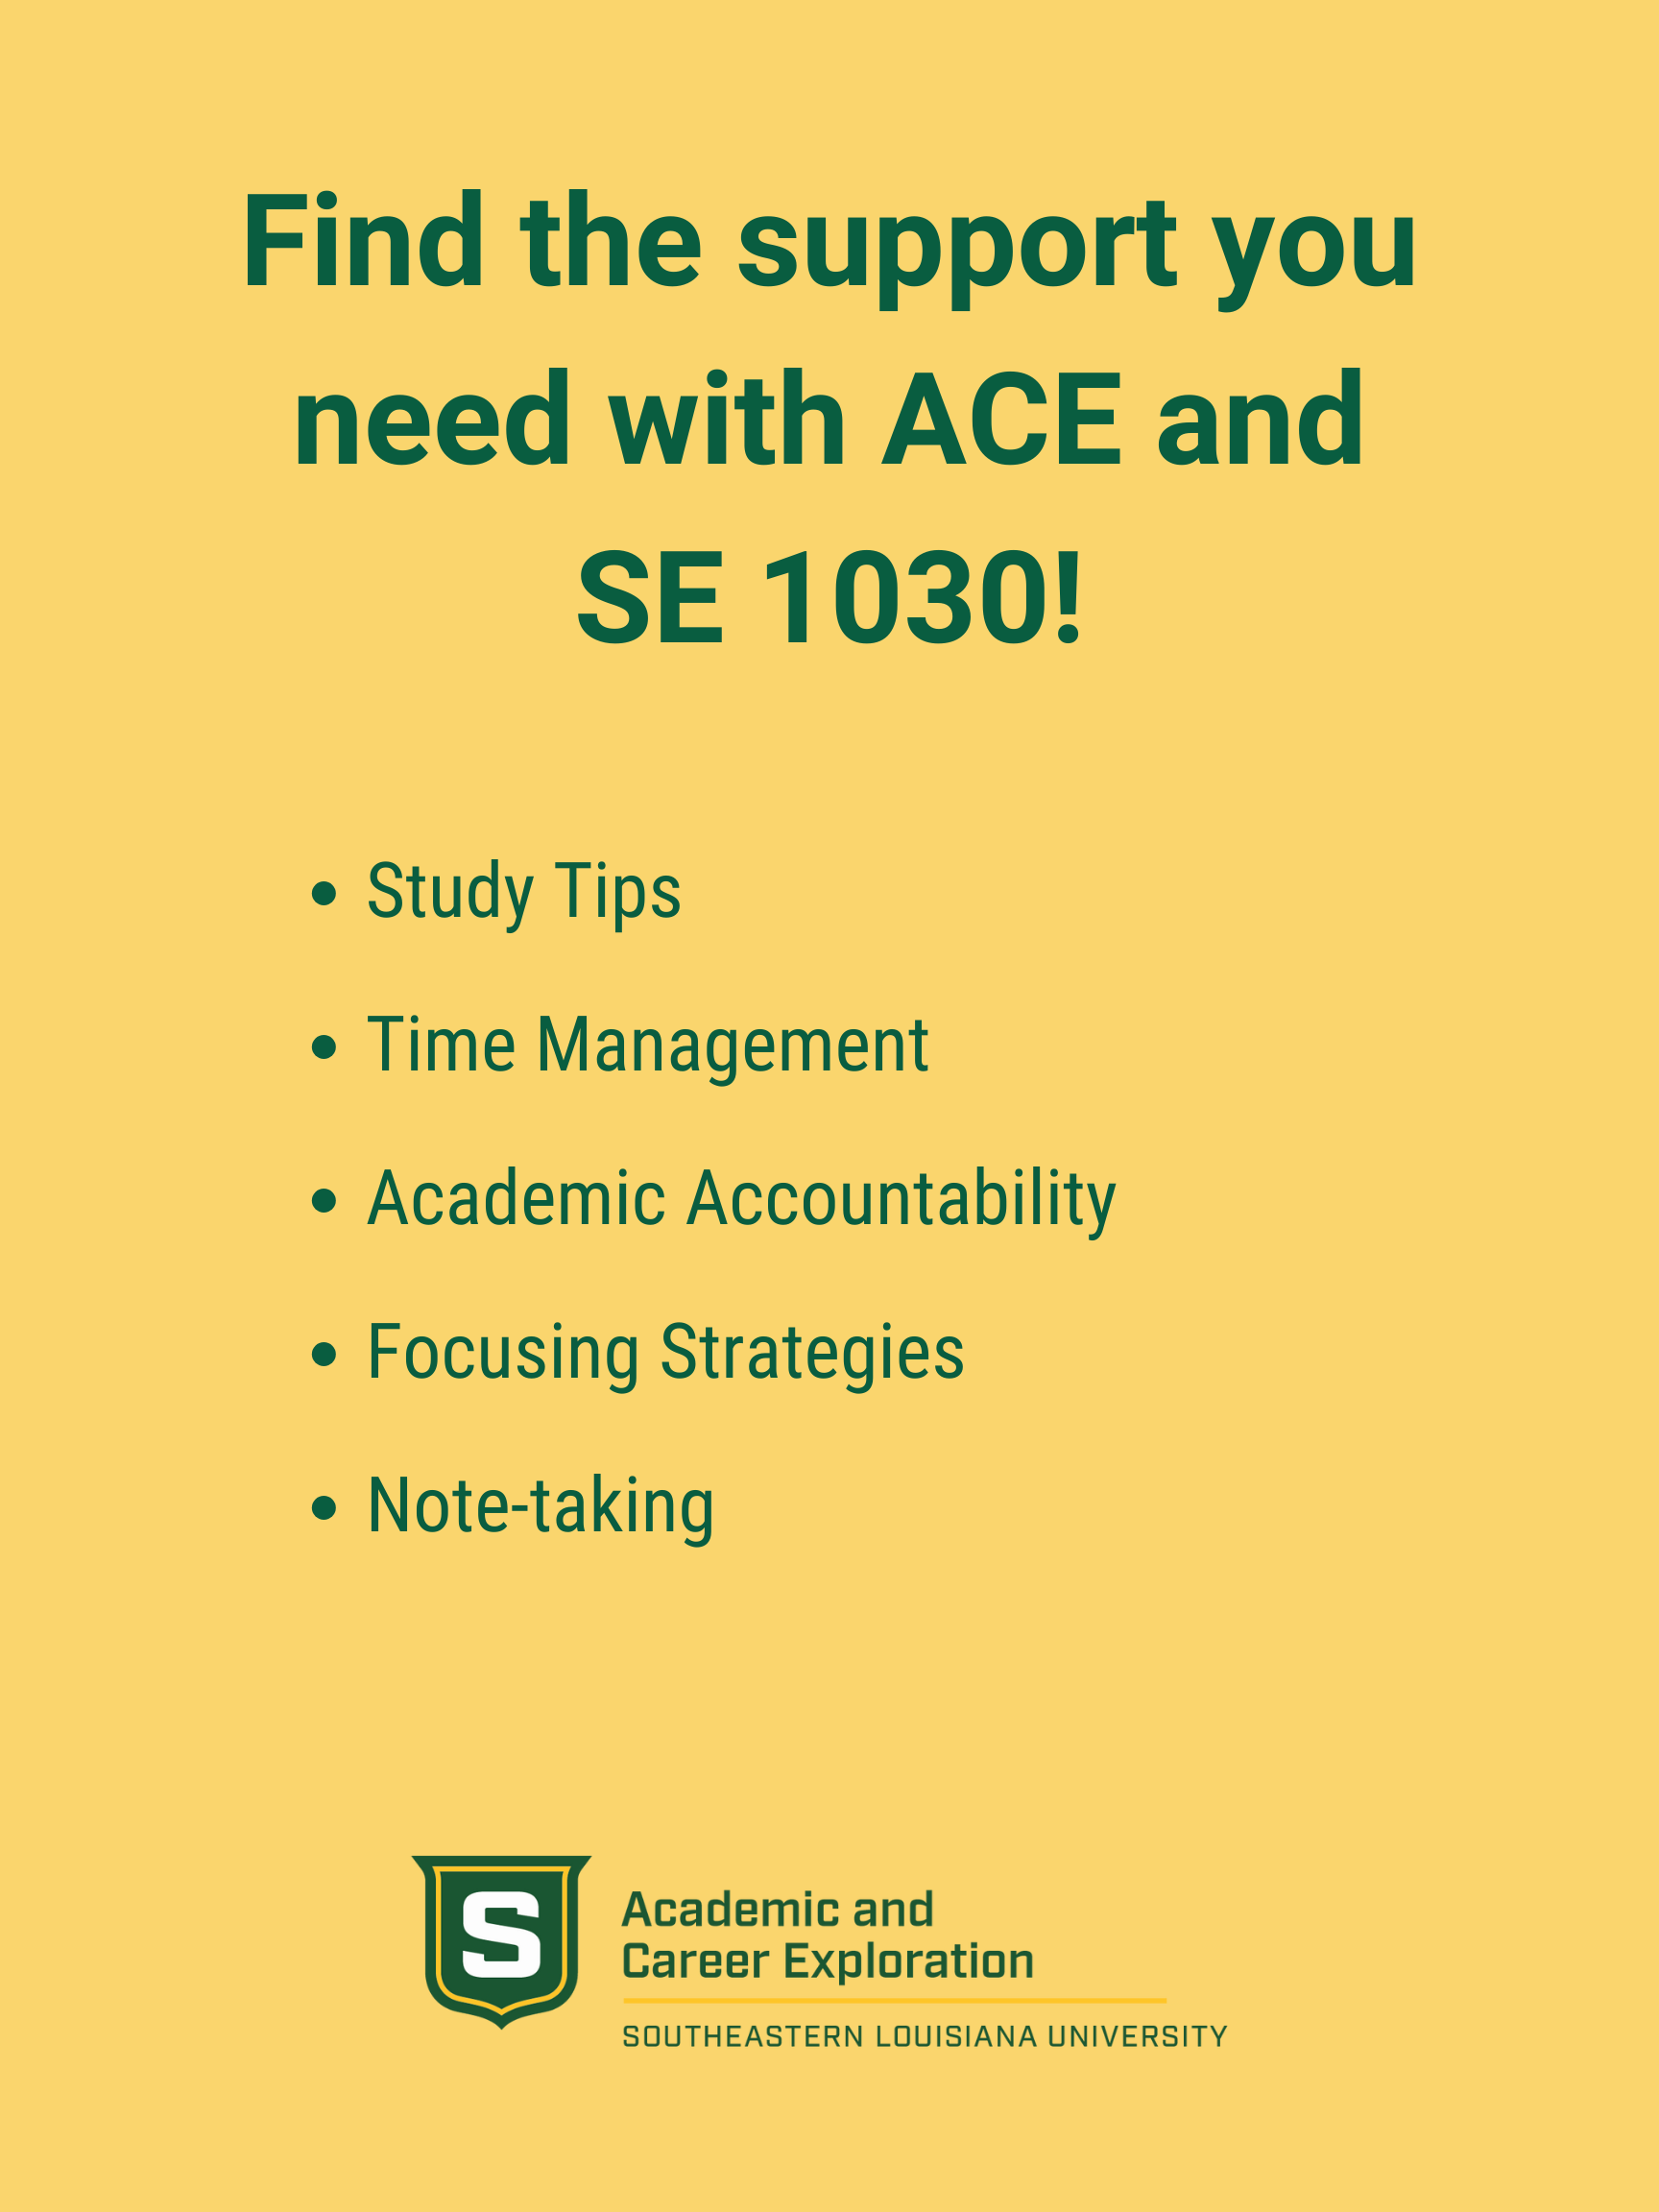 Find the support you need with ACE and SE 103